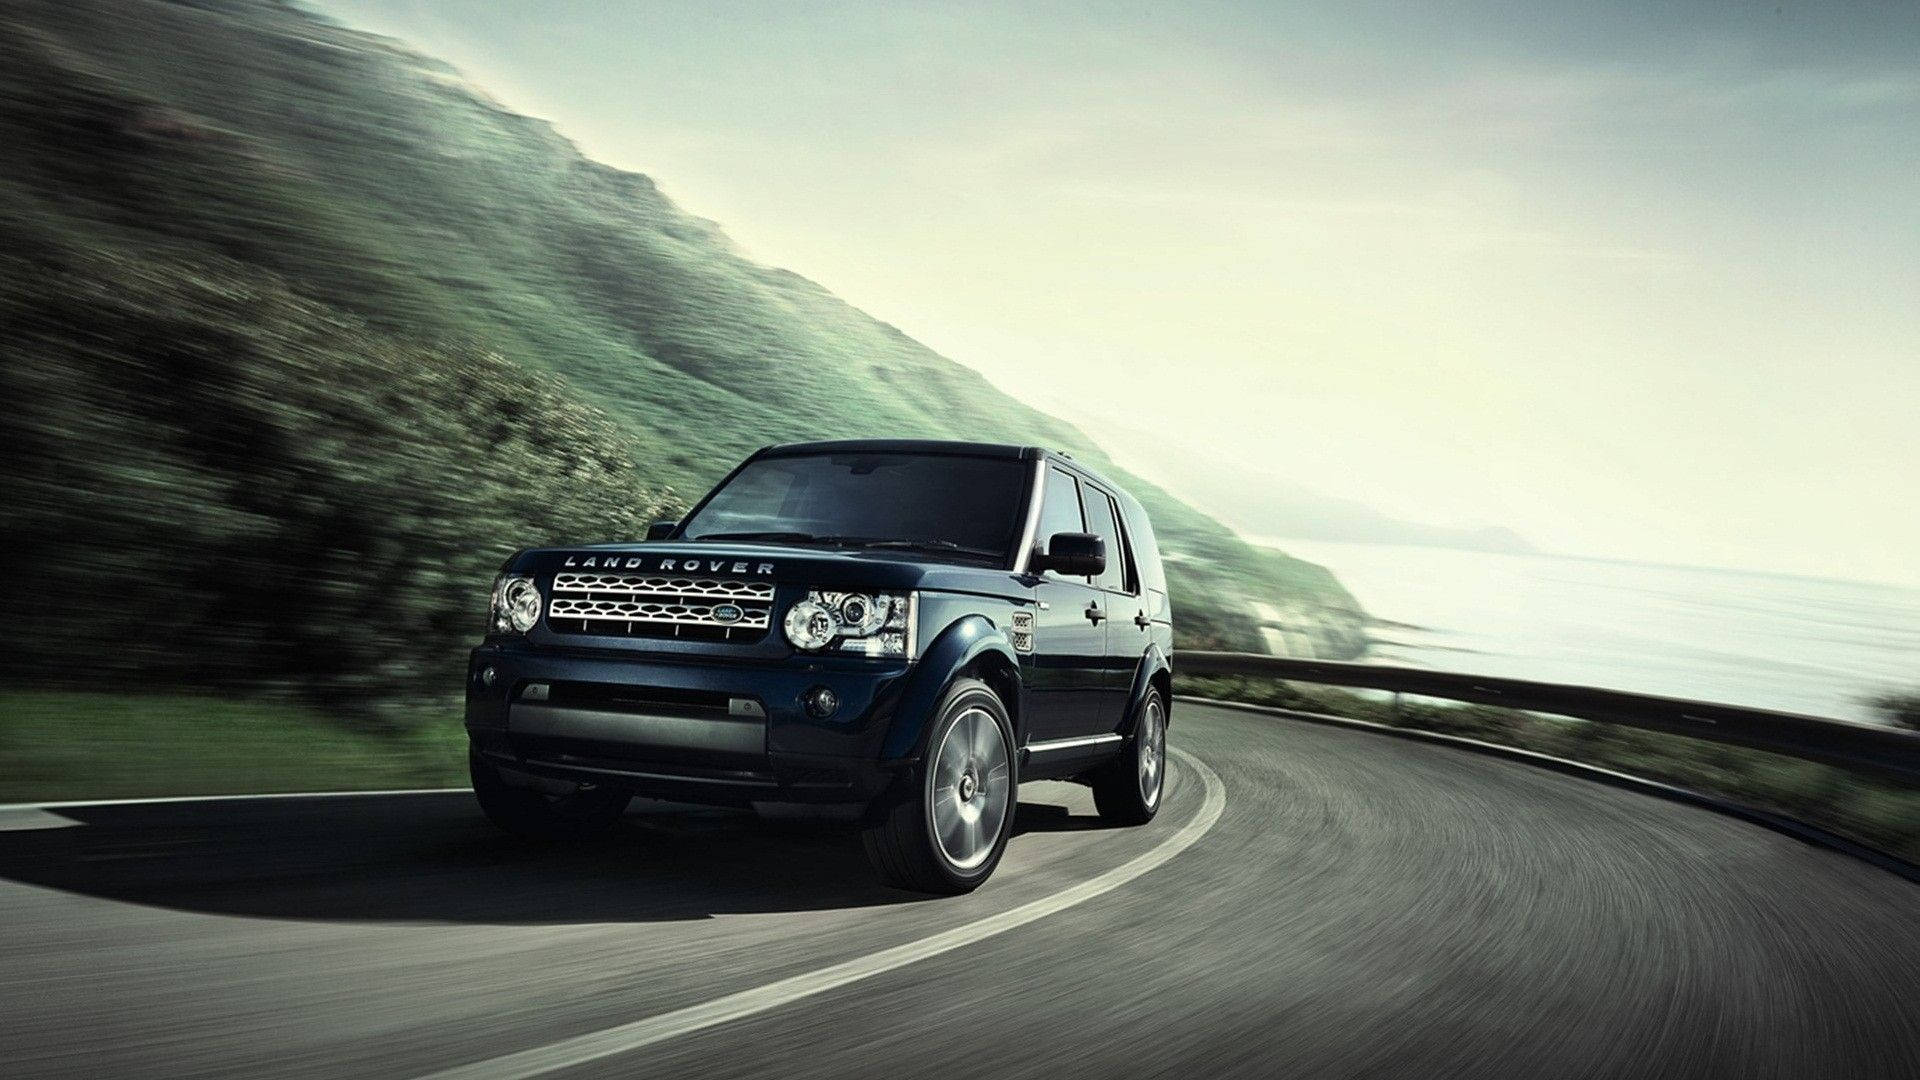 Dark Blue Land Rover Discovery 4 Picture